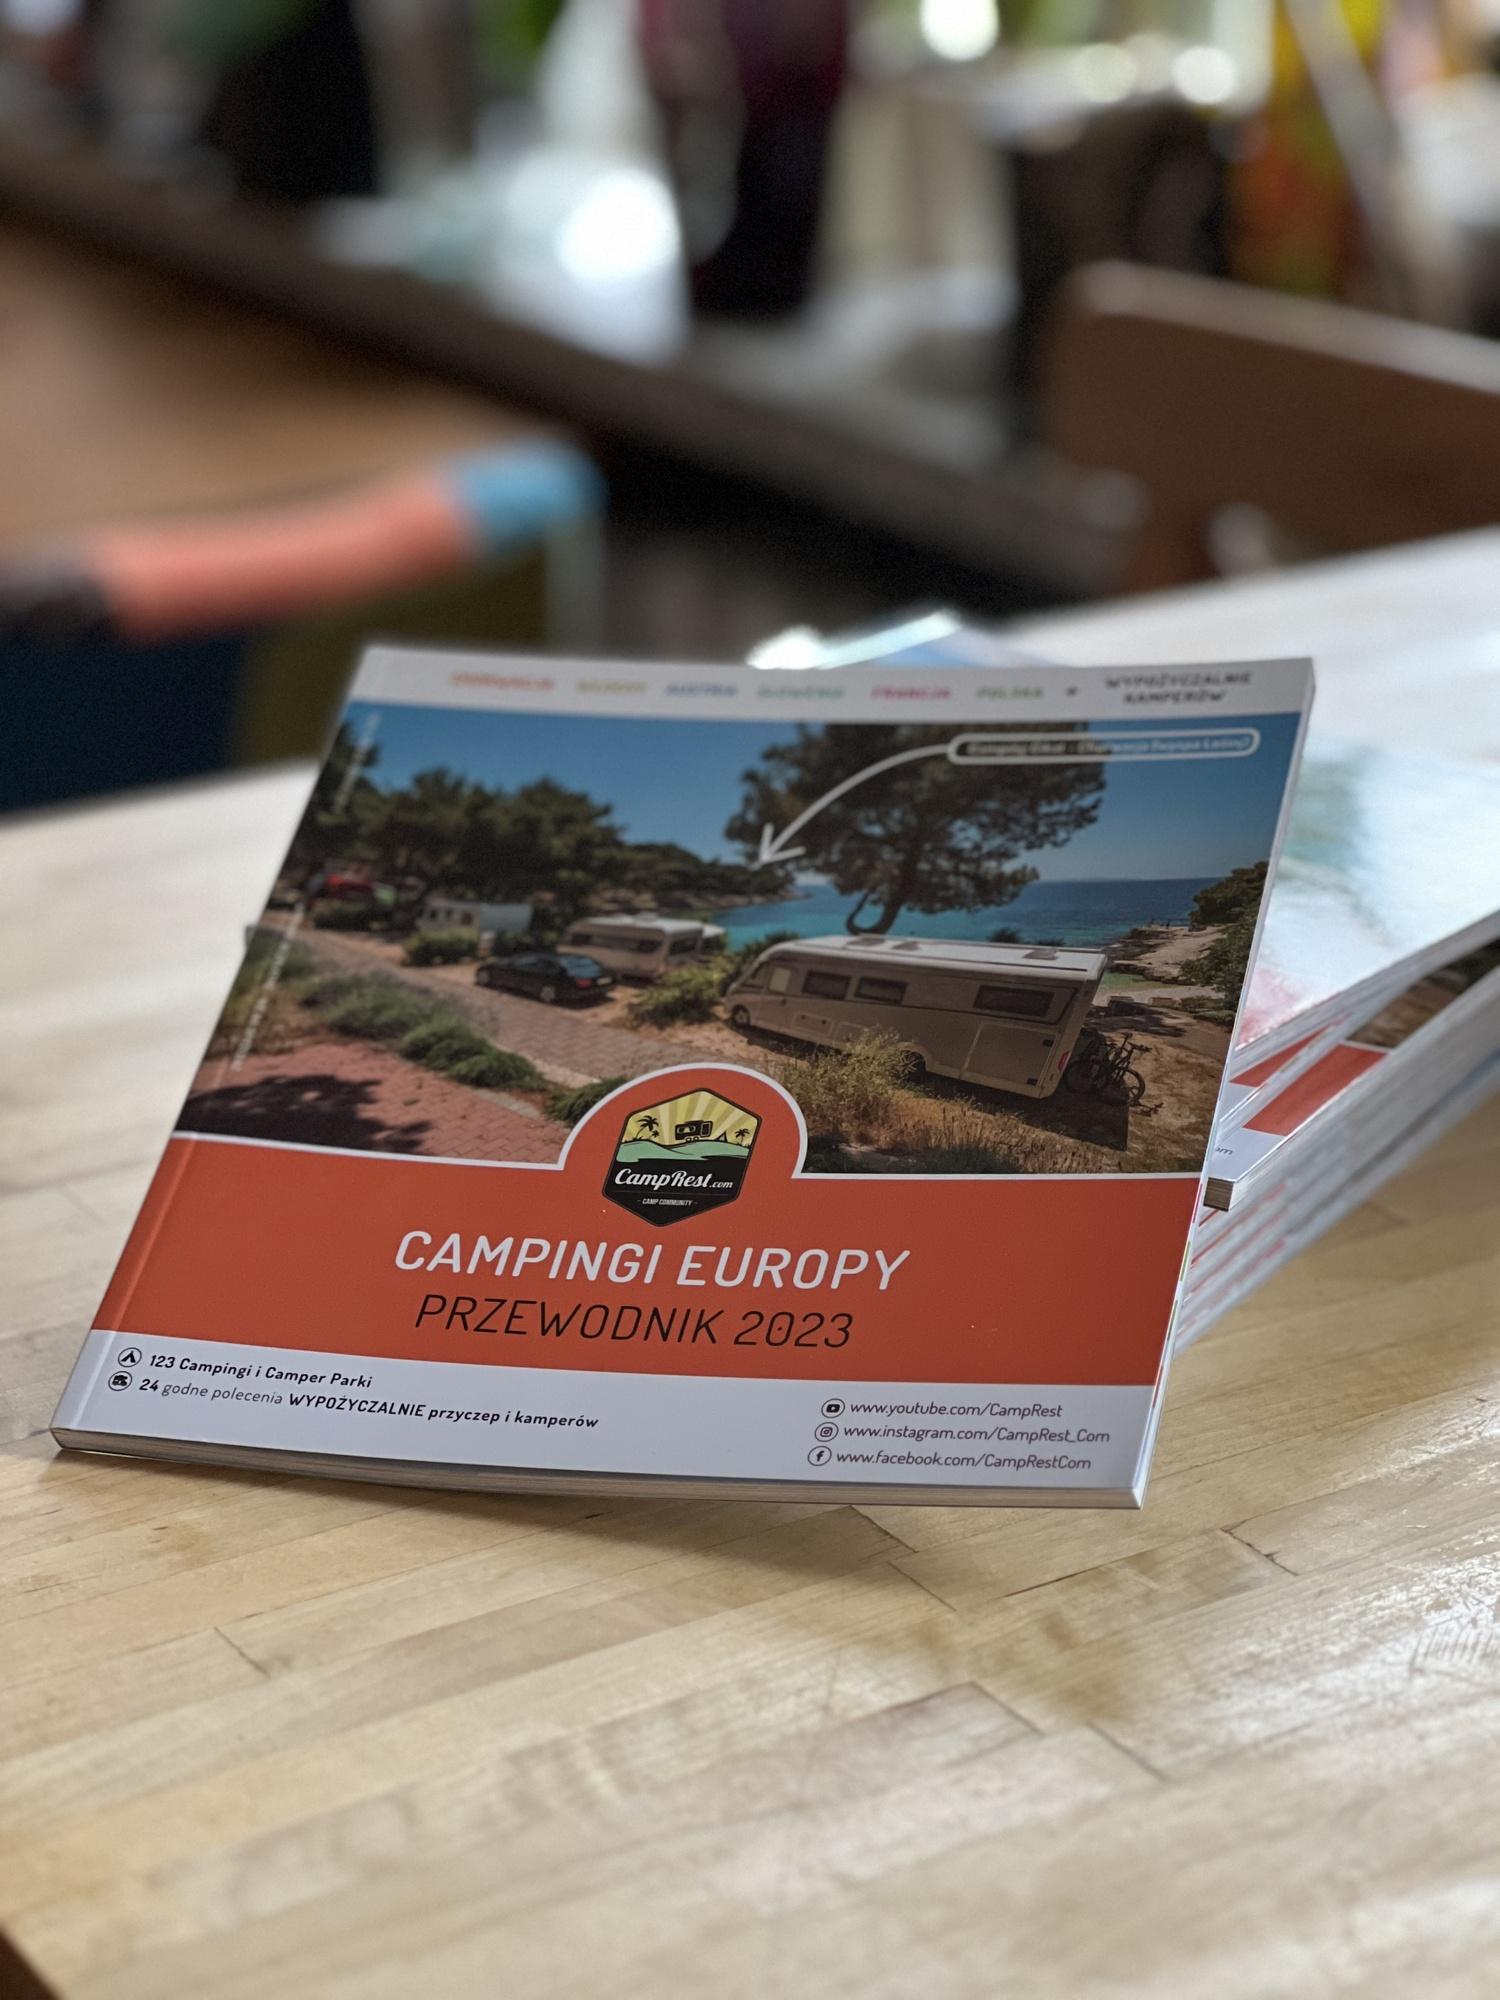 Camping Europe Guide 2023 - how to get it? – image 1